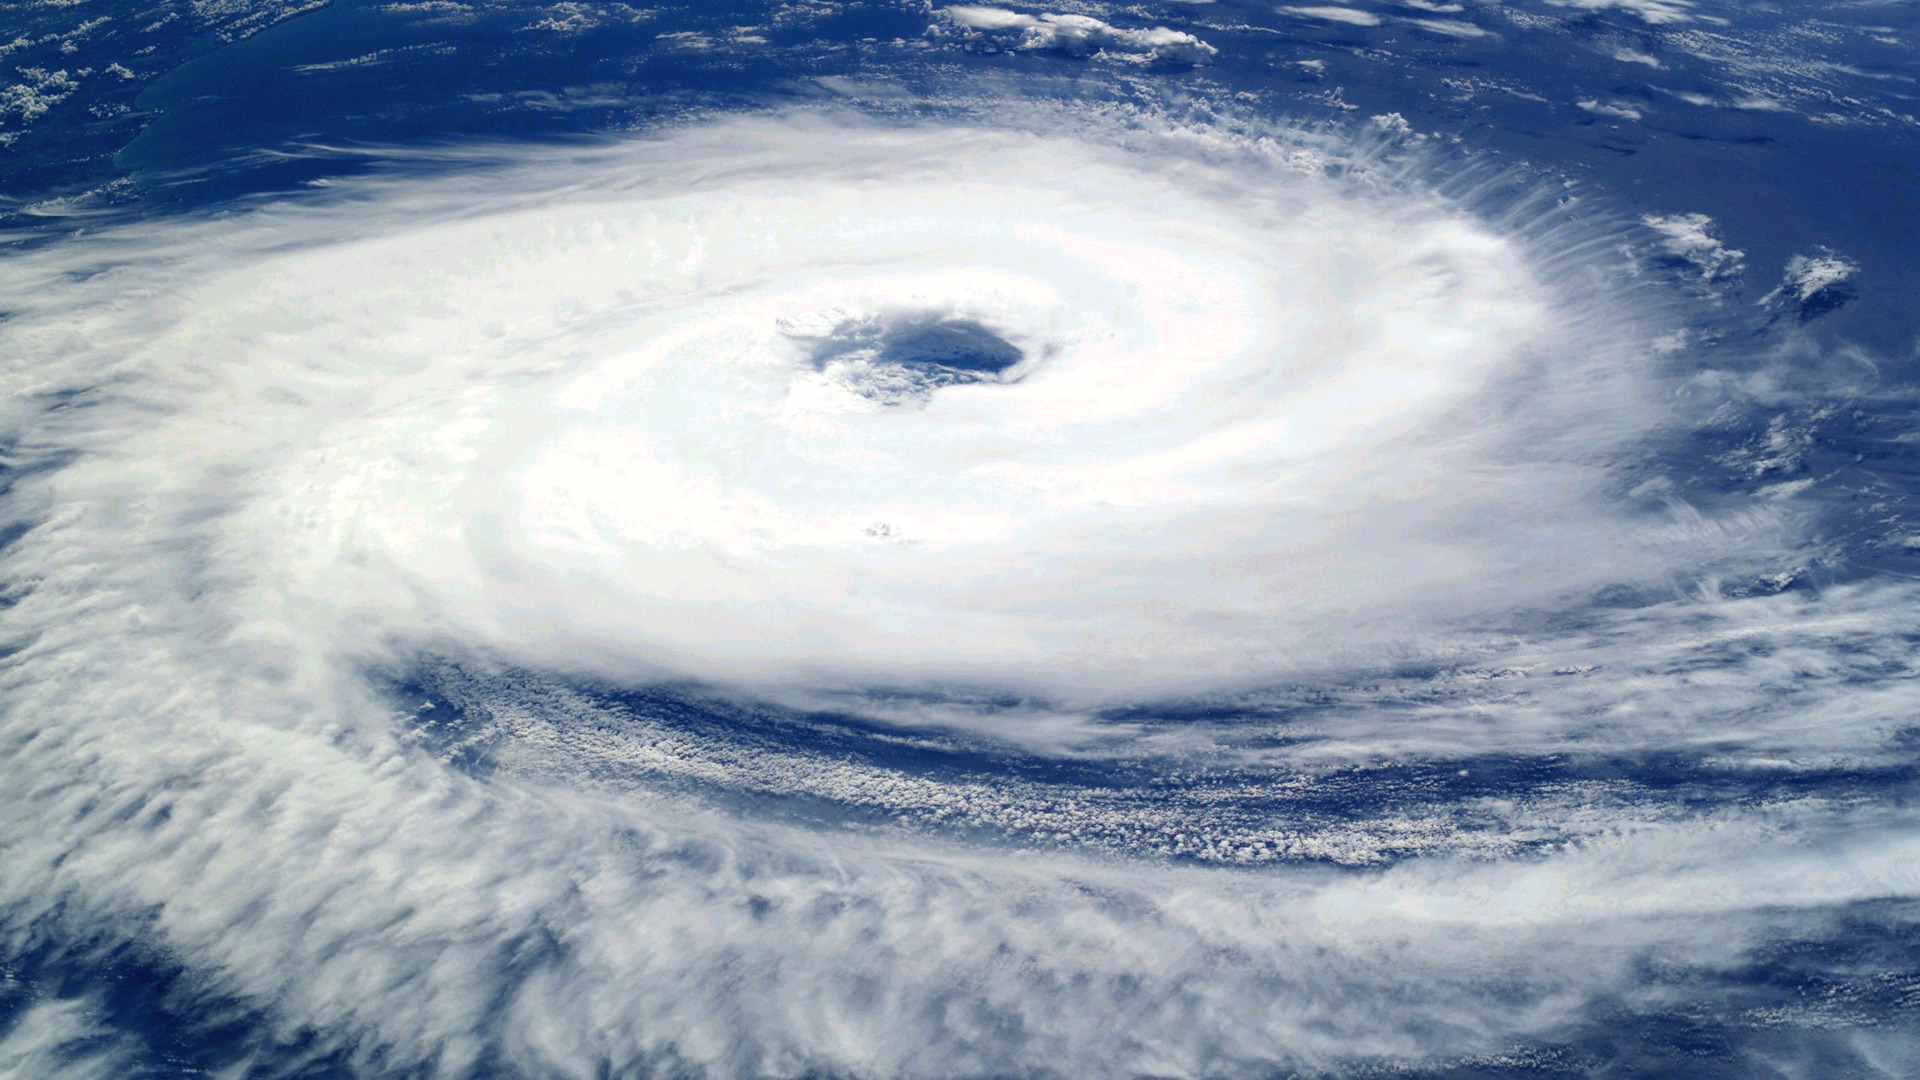 Desktop wallpaper featuring a stunning view of Earth from space, showcasing the beauty of a hurricane.